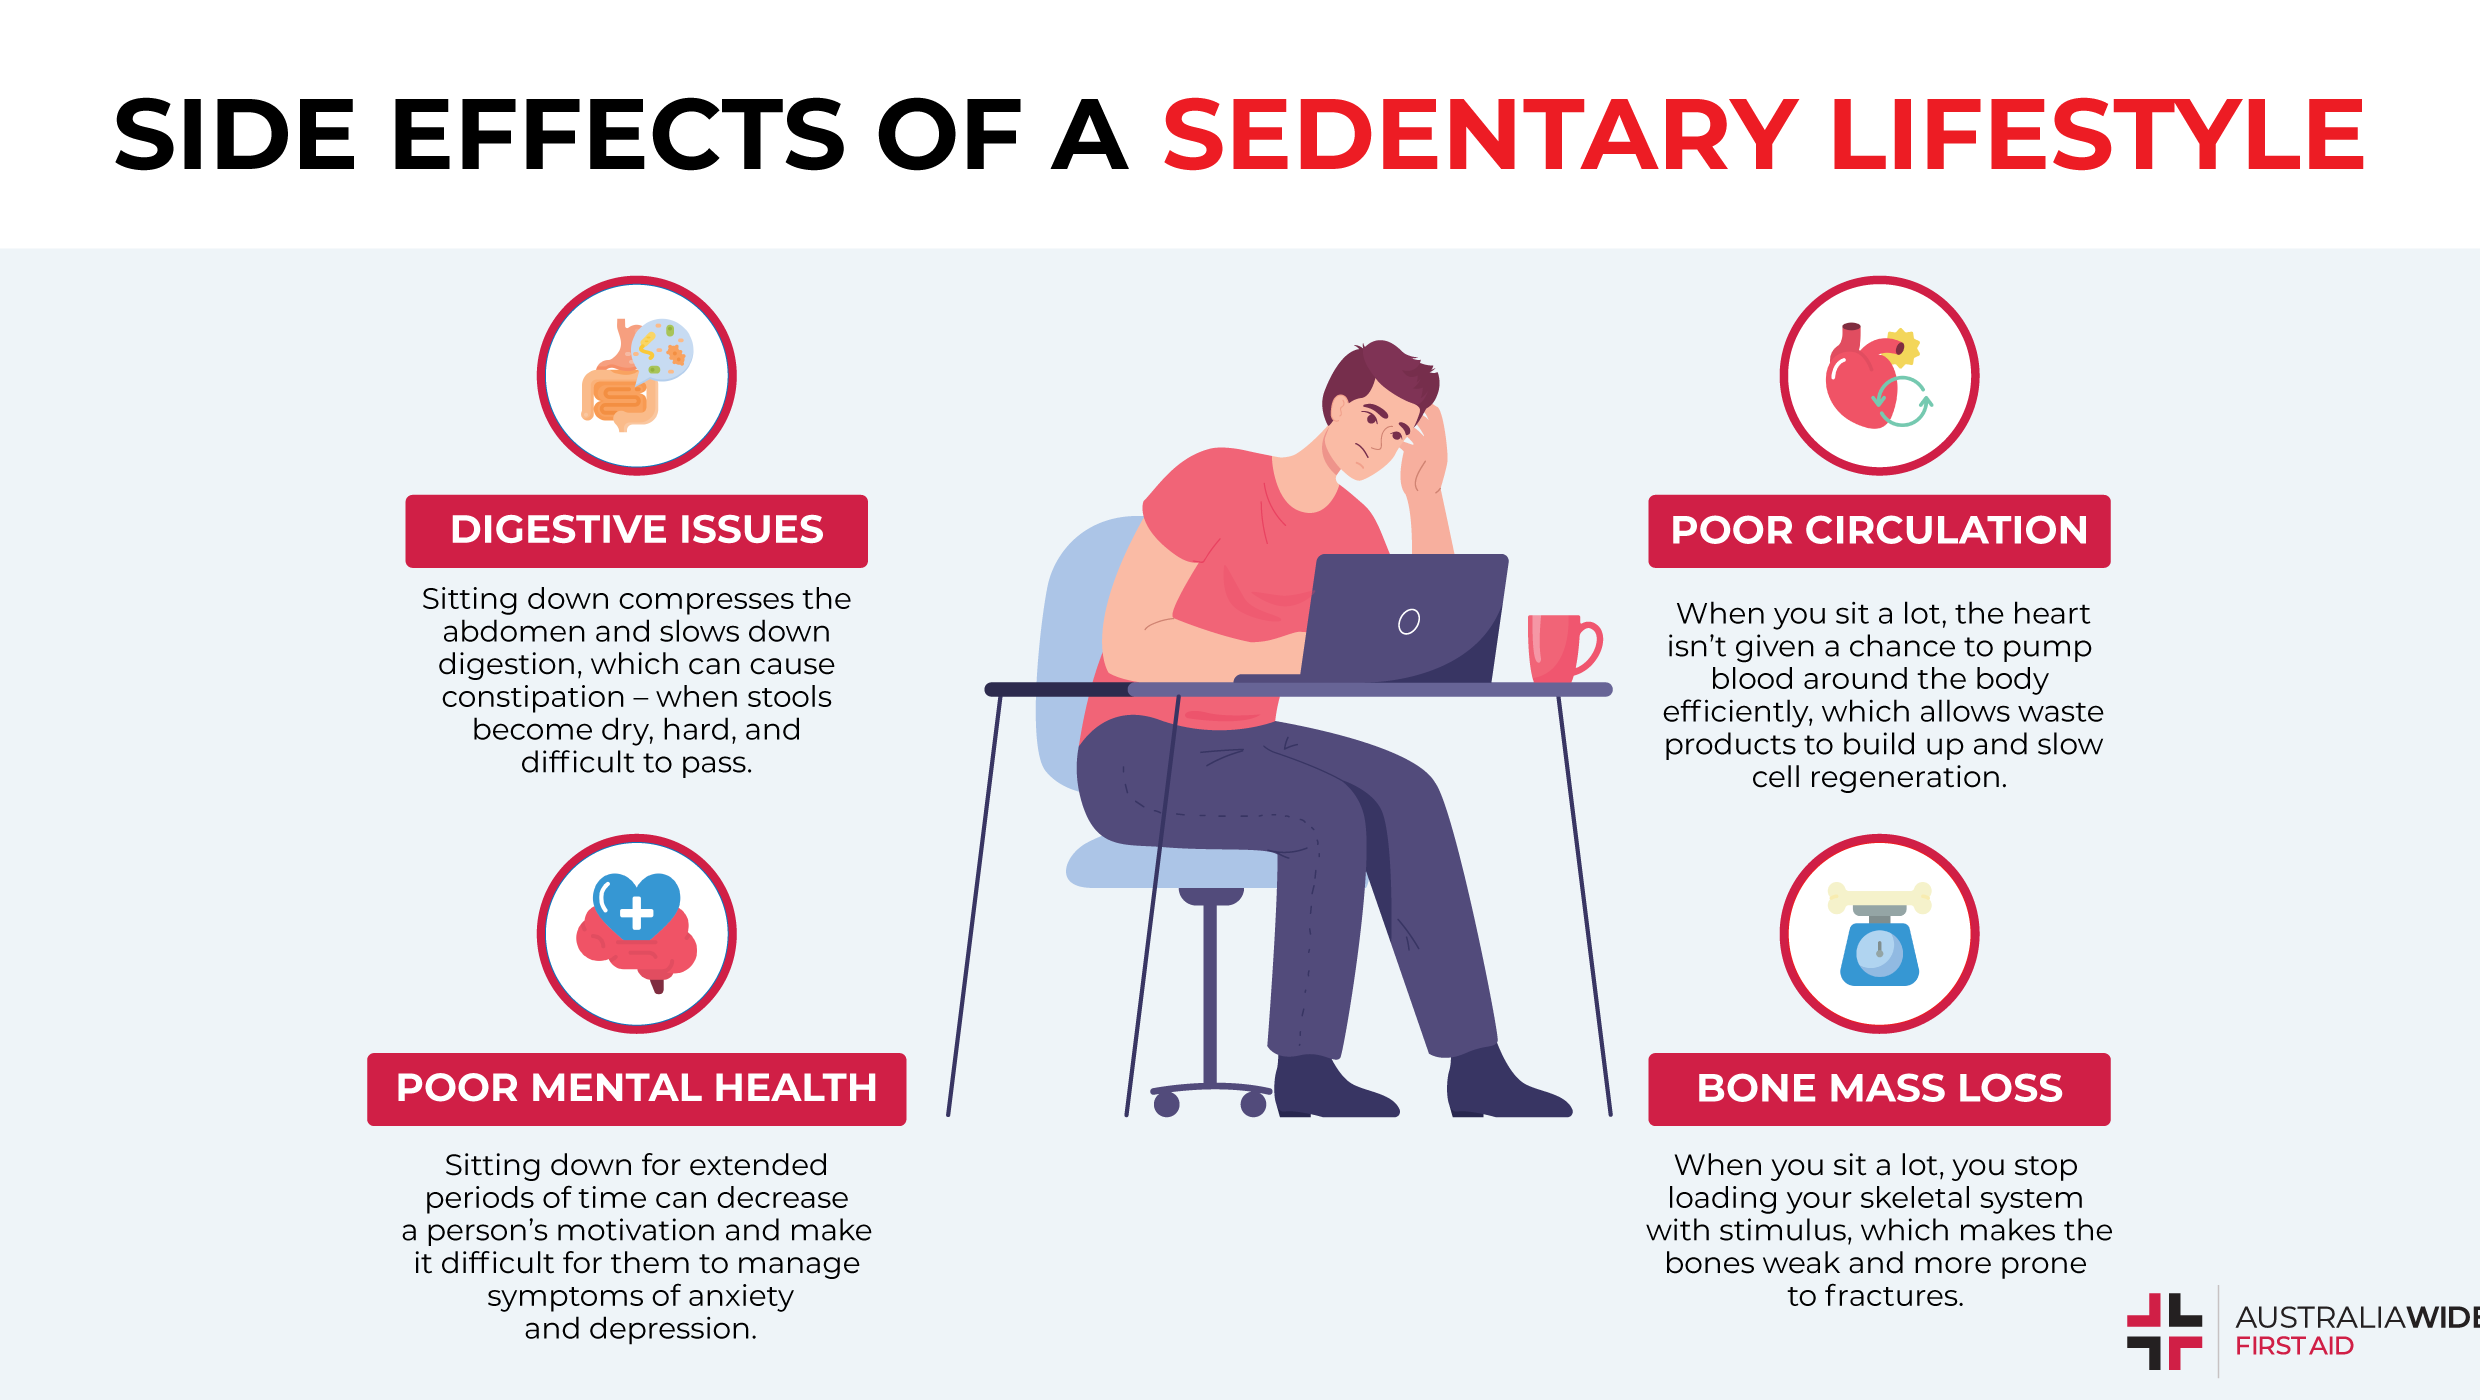 What are the dangers of a sedentary lifestyle?